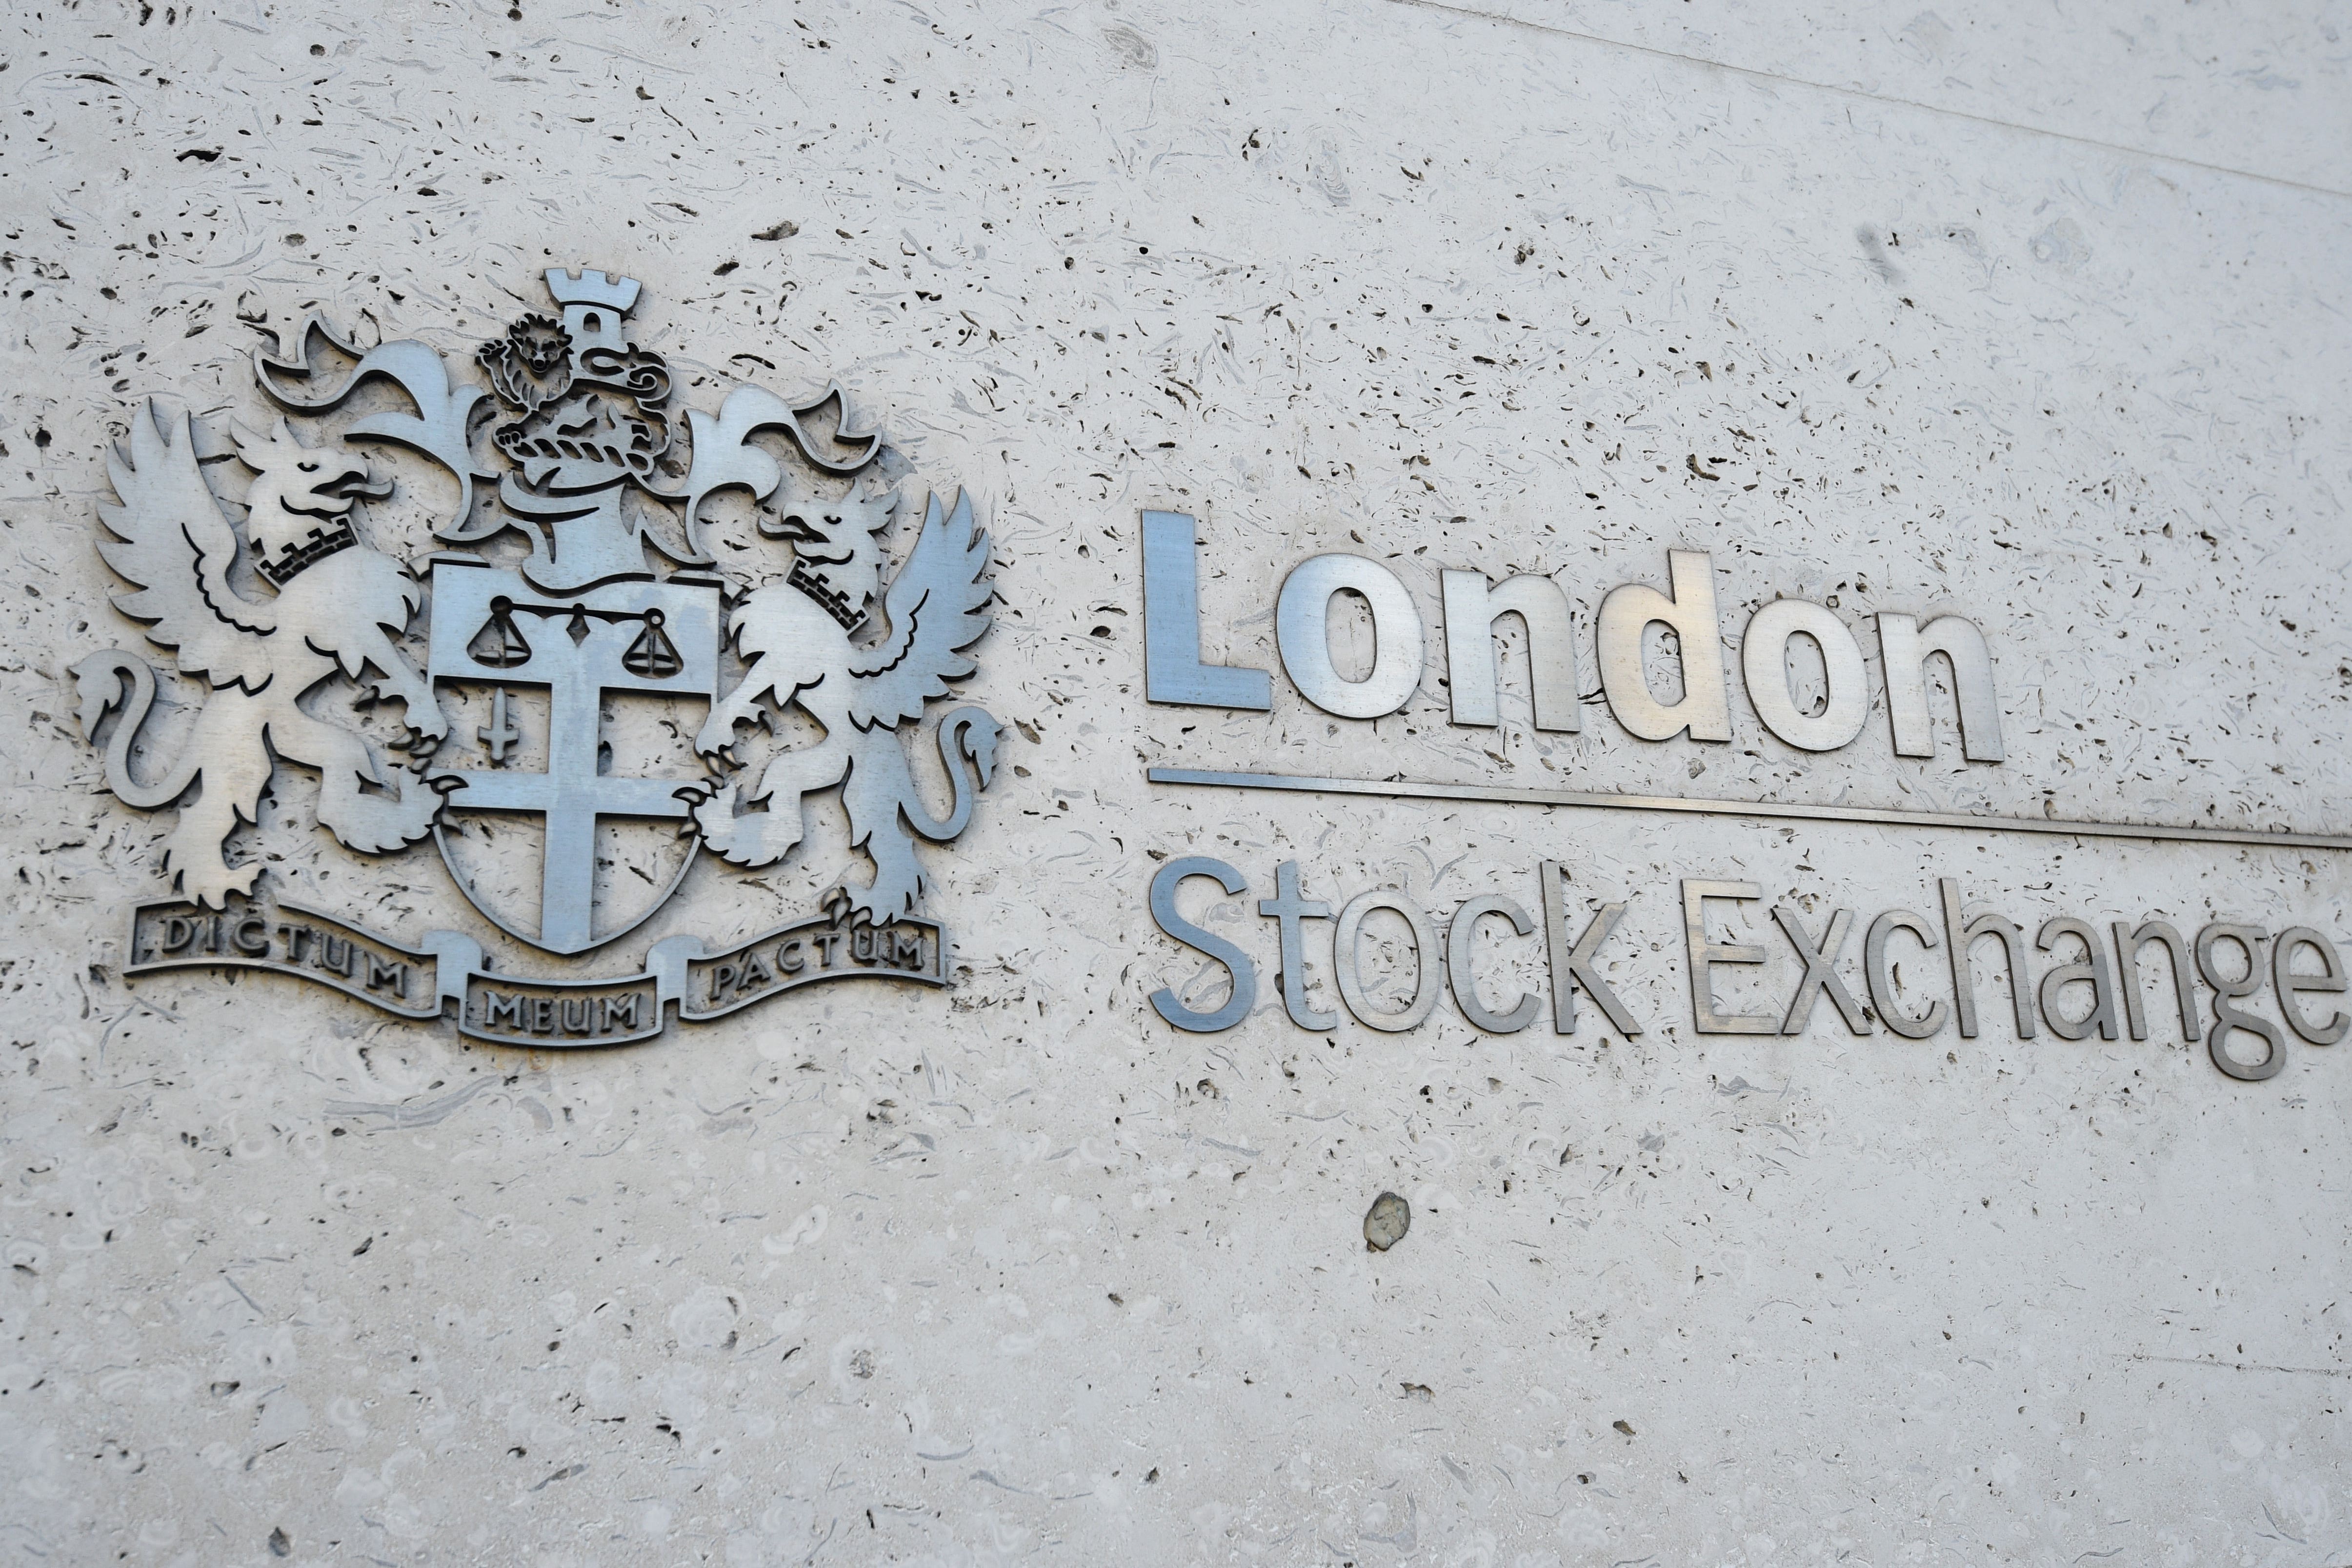 The FTSE 100 suffered its third consecutive decline (Kirsty O’Connor/PA)